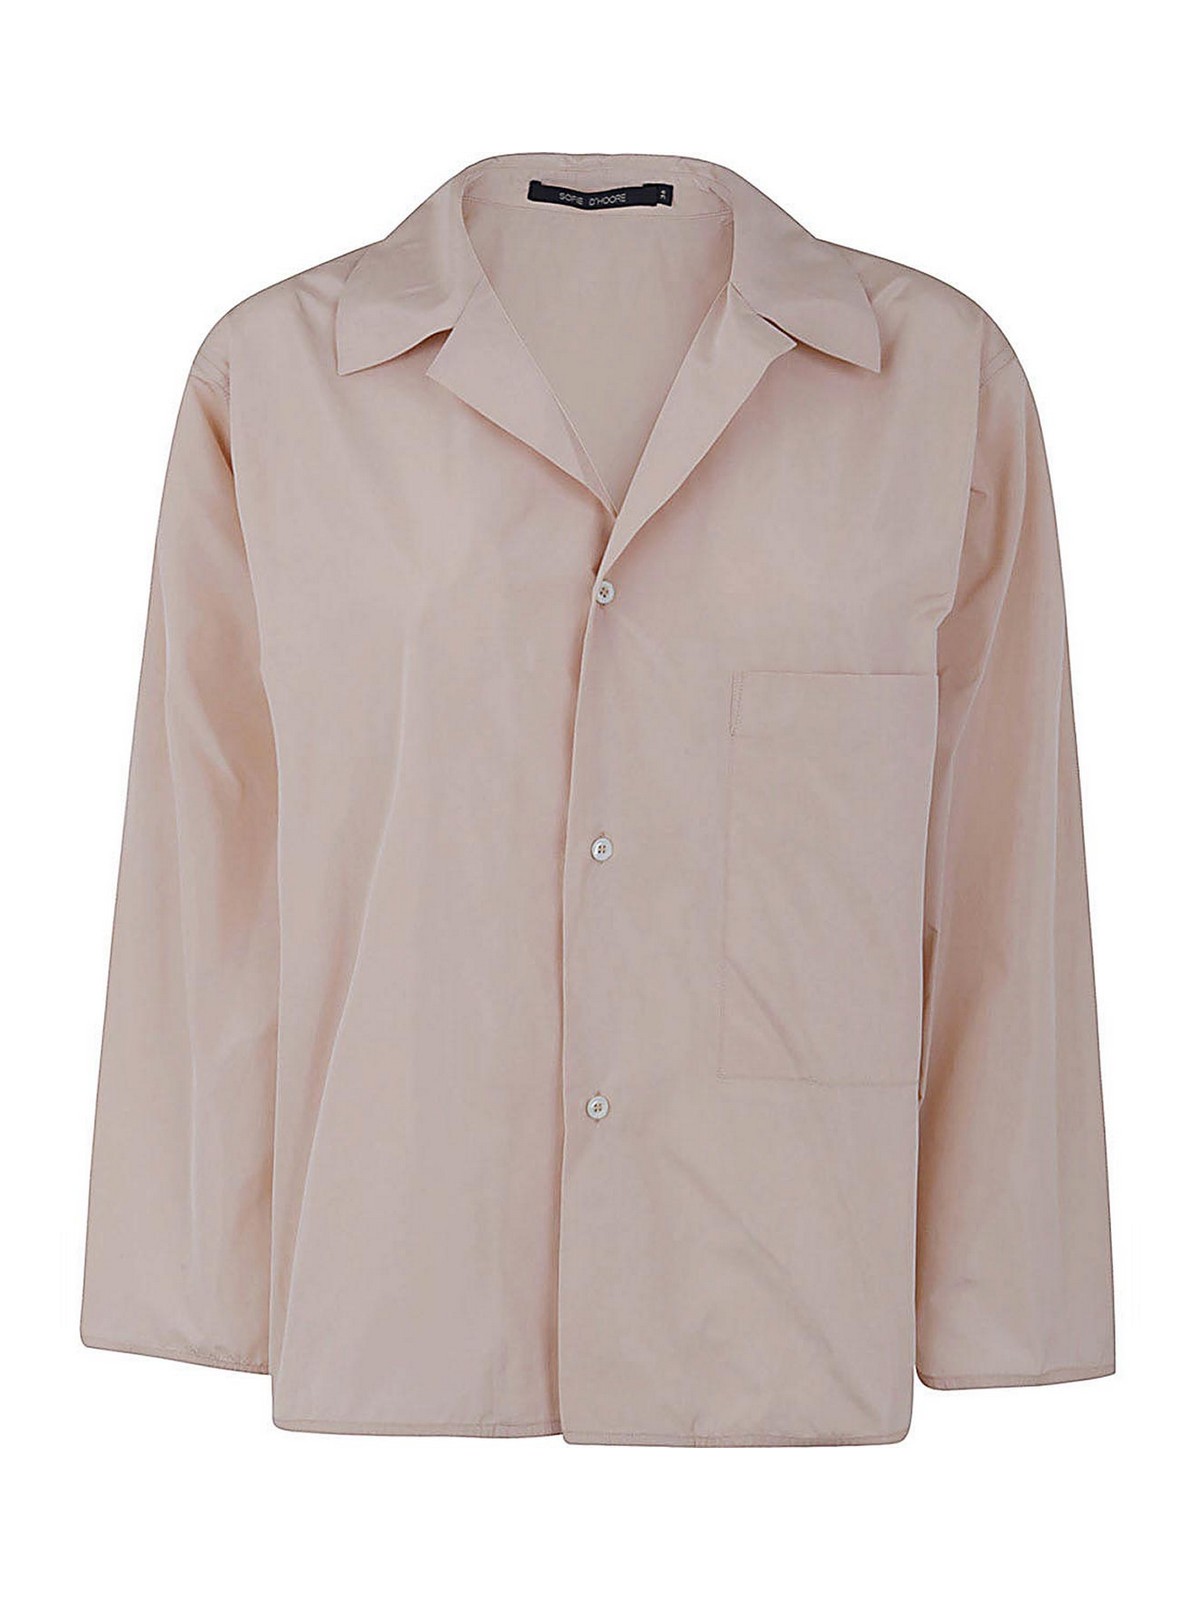 SOFIE D'HOORE LONG SLEEVE SHIRT WITH FRONT APPLIED POCKET